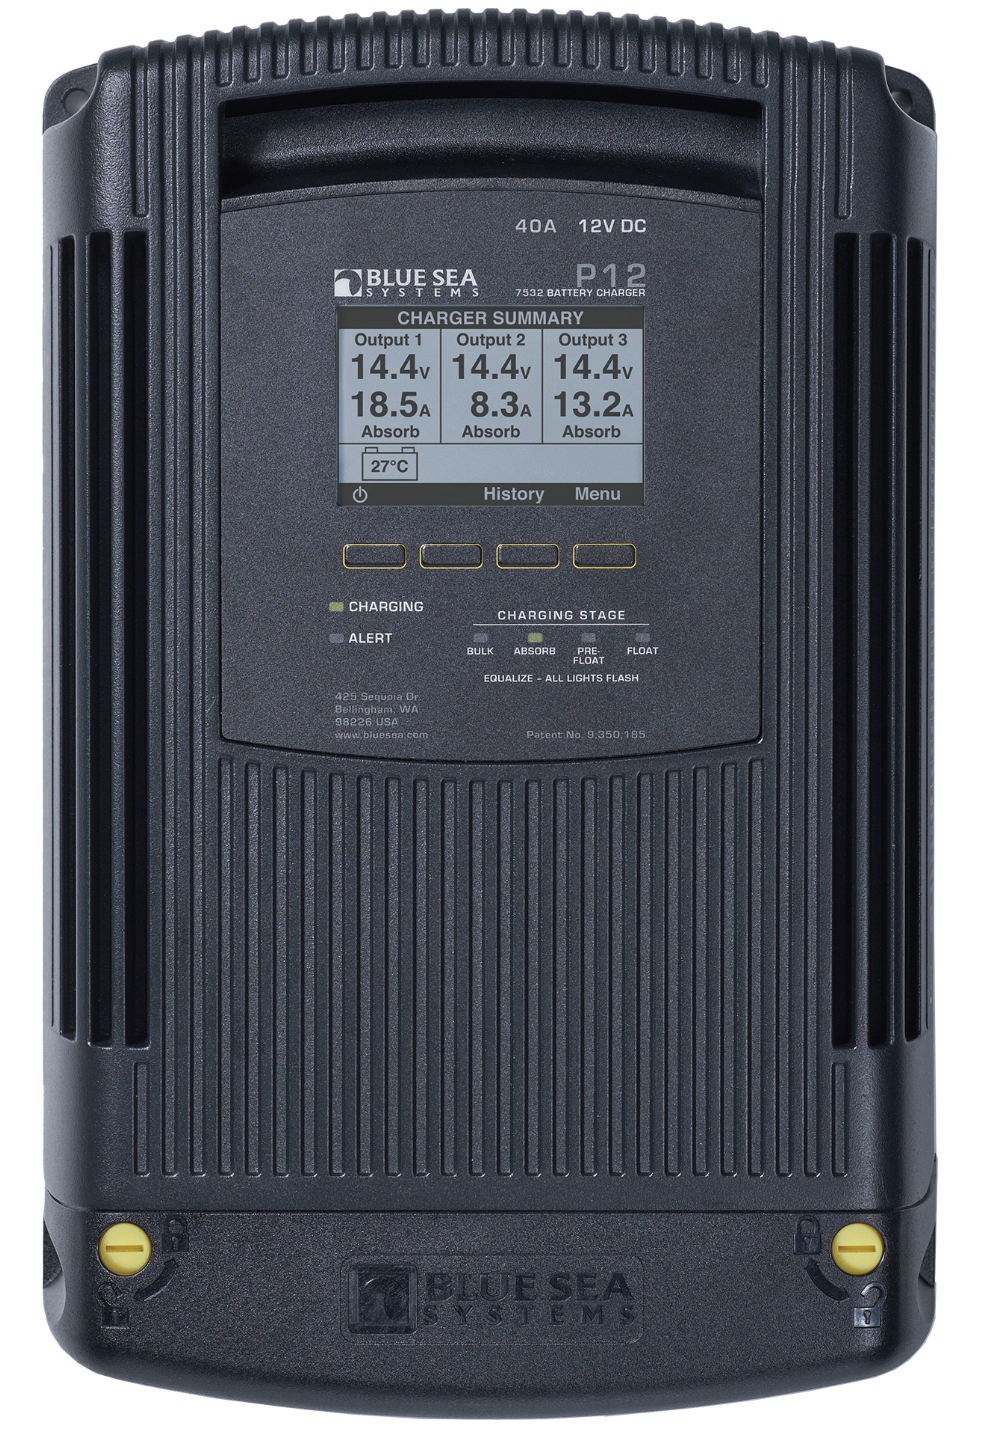 P12 Battery Charger - 12V DC 40A